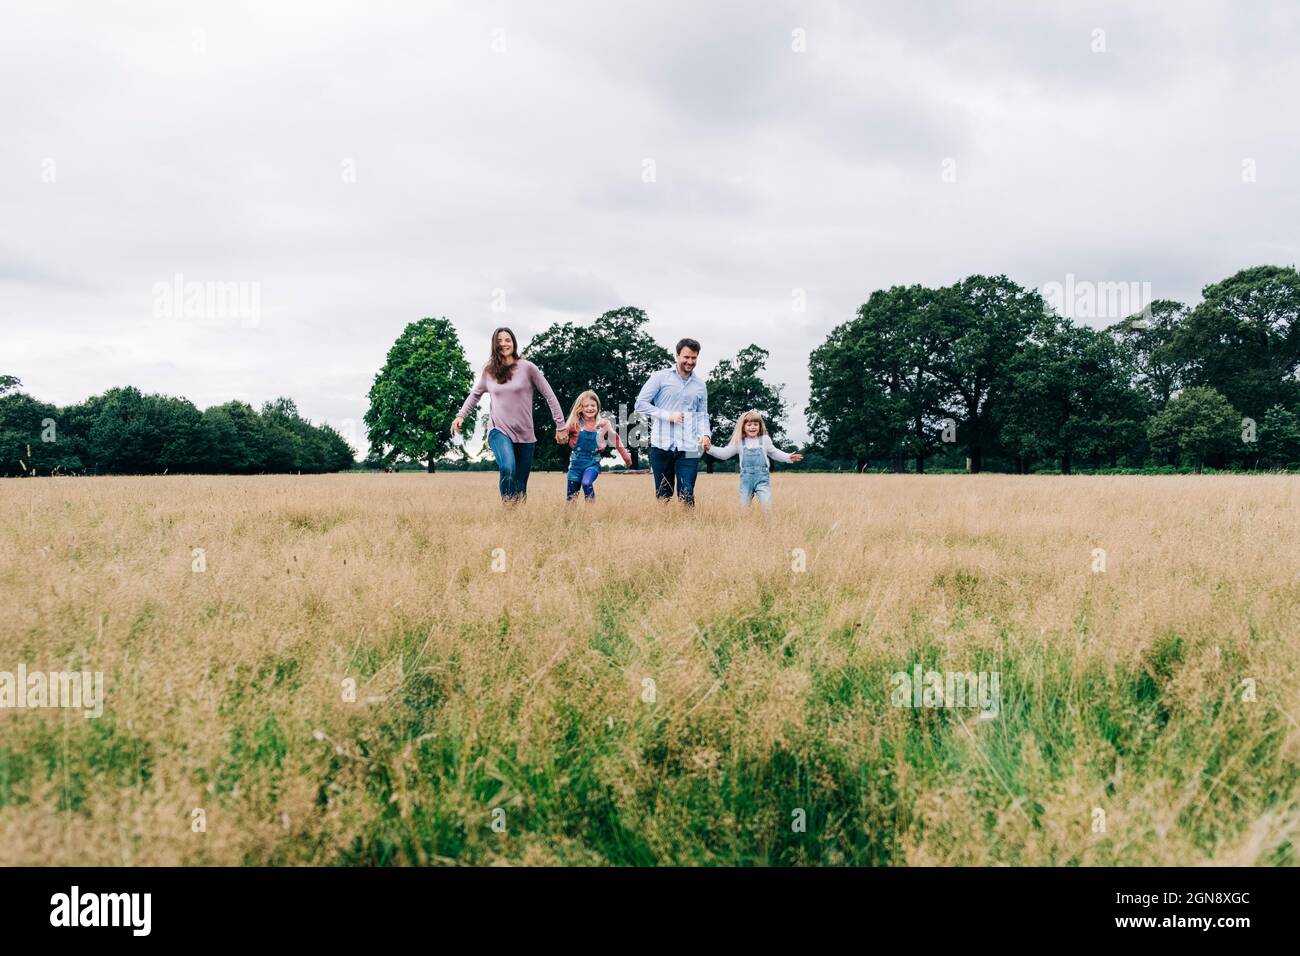 Carefree family holding hands while walking on grass Stock Photo